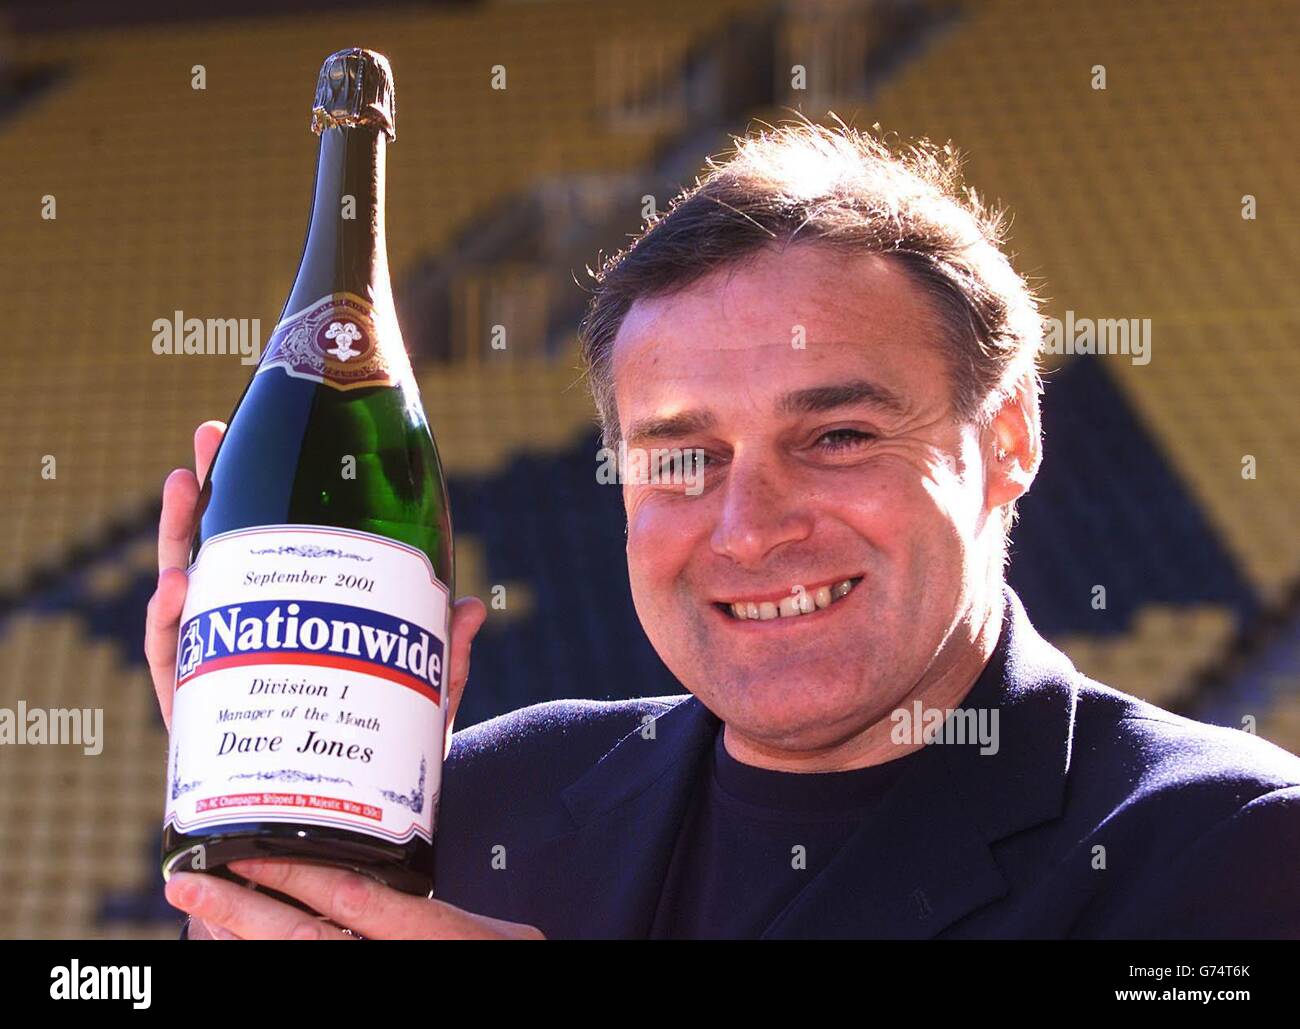 Wolverhampton Wanderers Manager Dave Jones is awarded Nationwide Division One Manager of the Month for September, at Molineux, Wolverhampton. NO UNOFFICIAL CLUB WEBSITE USE. Stock Photo